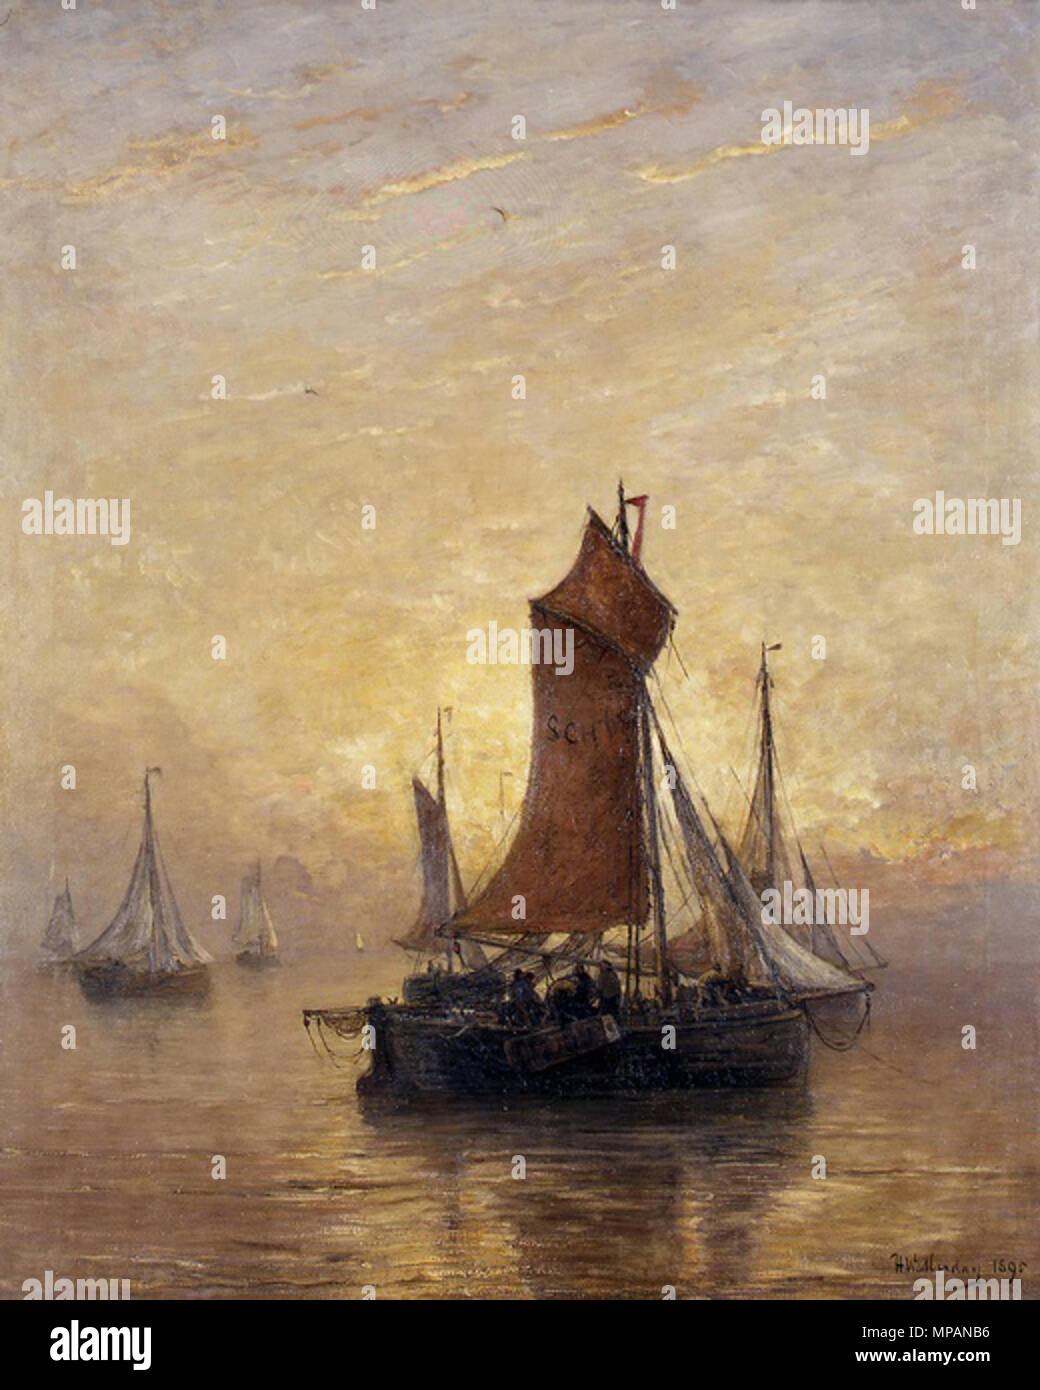 . Marine . 1895.    Hendrik Willem Mesdag  (1831–1915)     Description Dutch painter, draughtsman, printmaker and panorama painter  Date of birth/death 23 February 1831 10 July 1915  Location of birth/death Groningen The Hague  Work location Brussels (1867-1869), Norderney (1868), Scheveningen, Oosterbeek  Authority control  : Q474238 VIAF: 57417584 ISNI: 0000 0000 6677 849X ULAN: 500014234 LCCN: n82164738 MusicBrainz: 8a973c34-c005-4ded-aa1d-a2df11577337 WorldCat 885 Mesdag, Marine Stock Photo